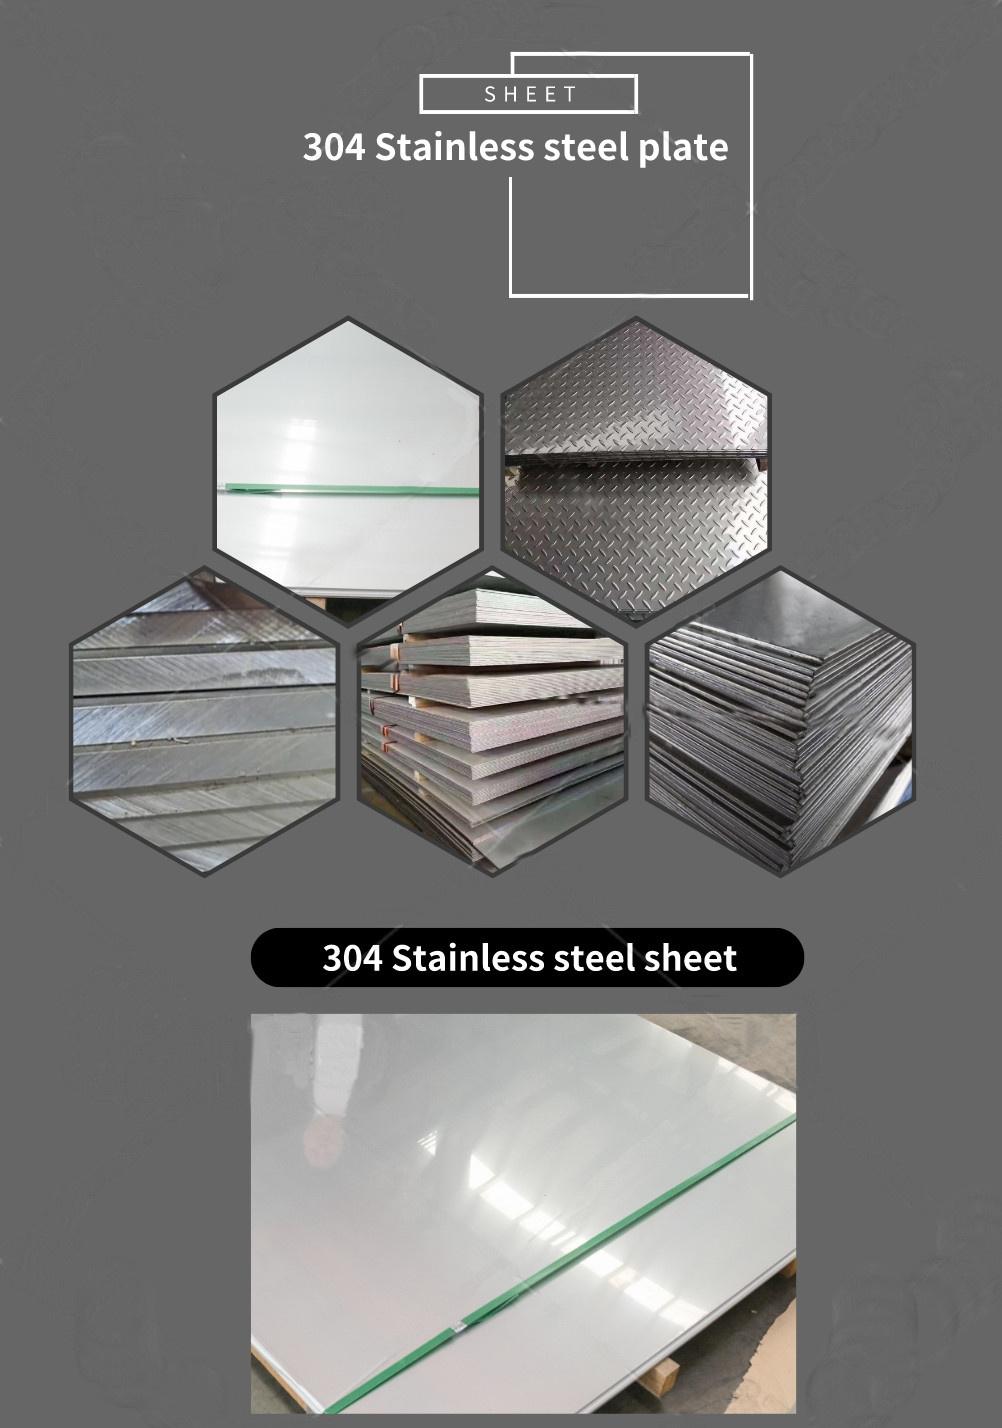 ASTM/GB/JIS 301 304 Hot Rolled Stainless Steel Plate for Boat Board